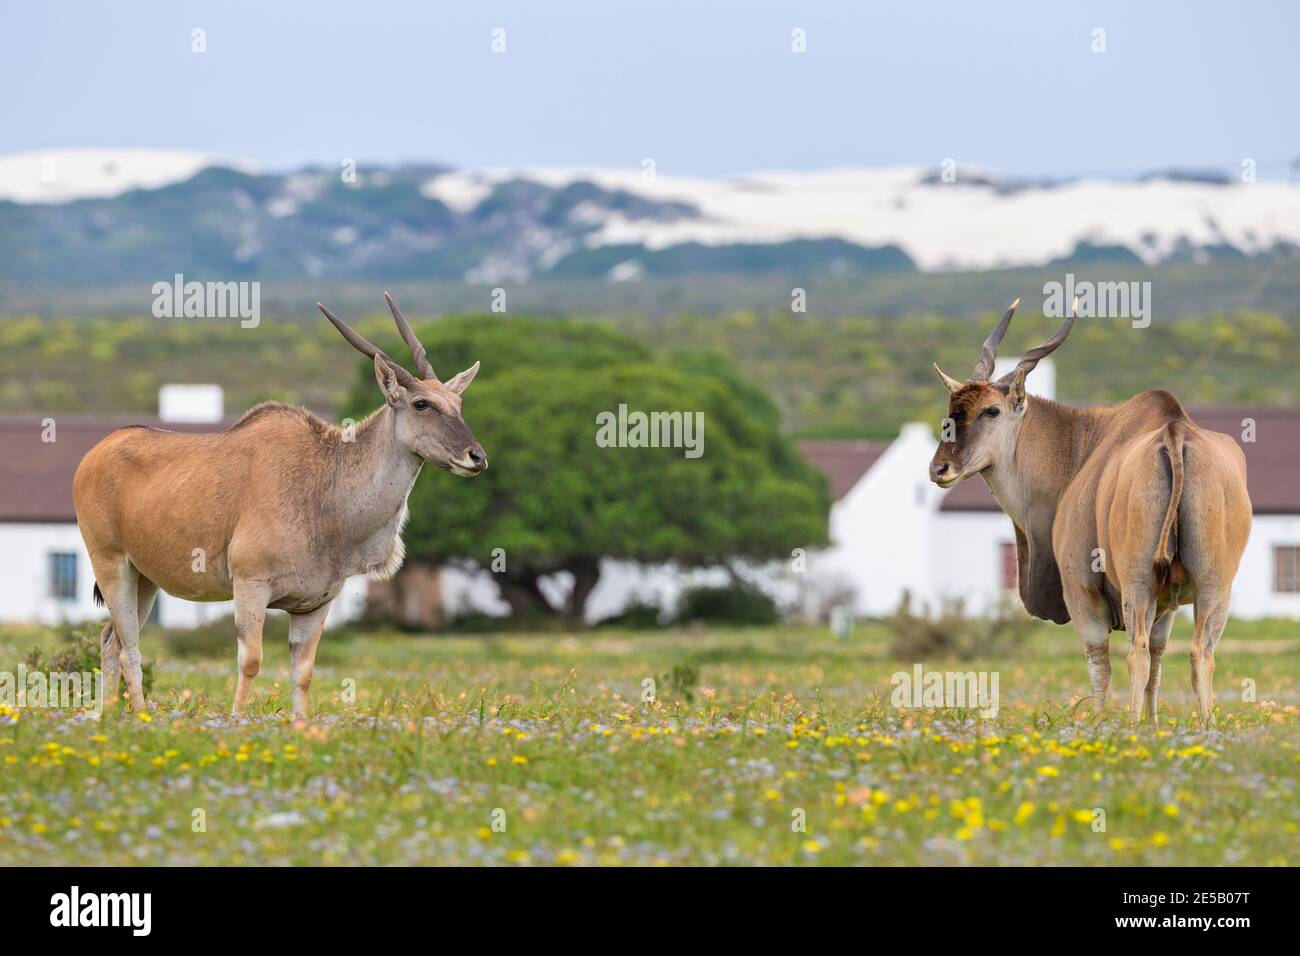 Eland (Taurotragus oryx) at De Hoop nature reserve, Western Cape, South Africa Stock Photo